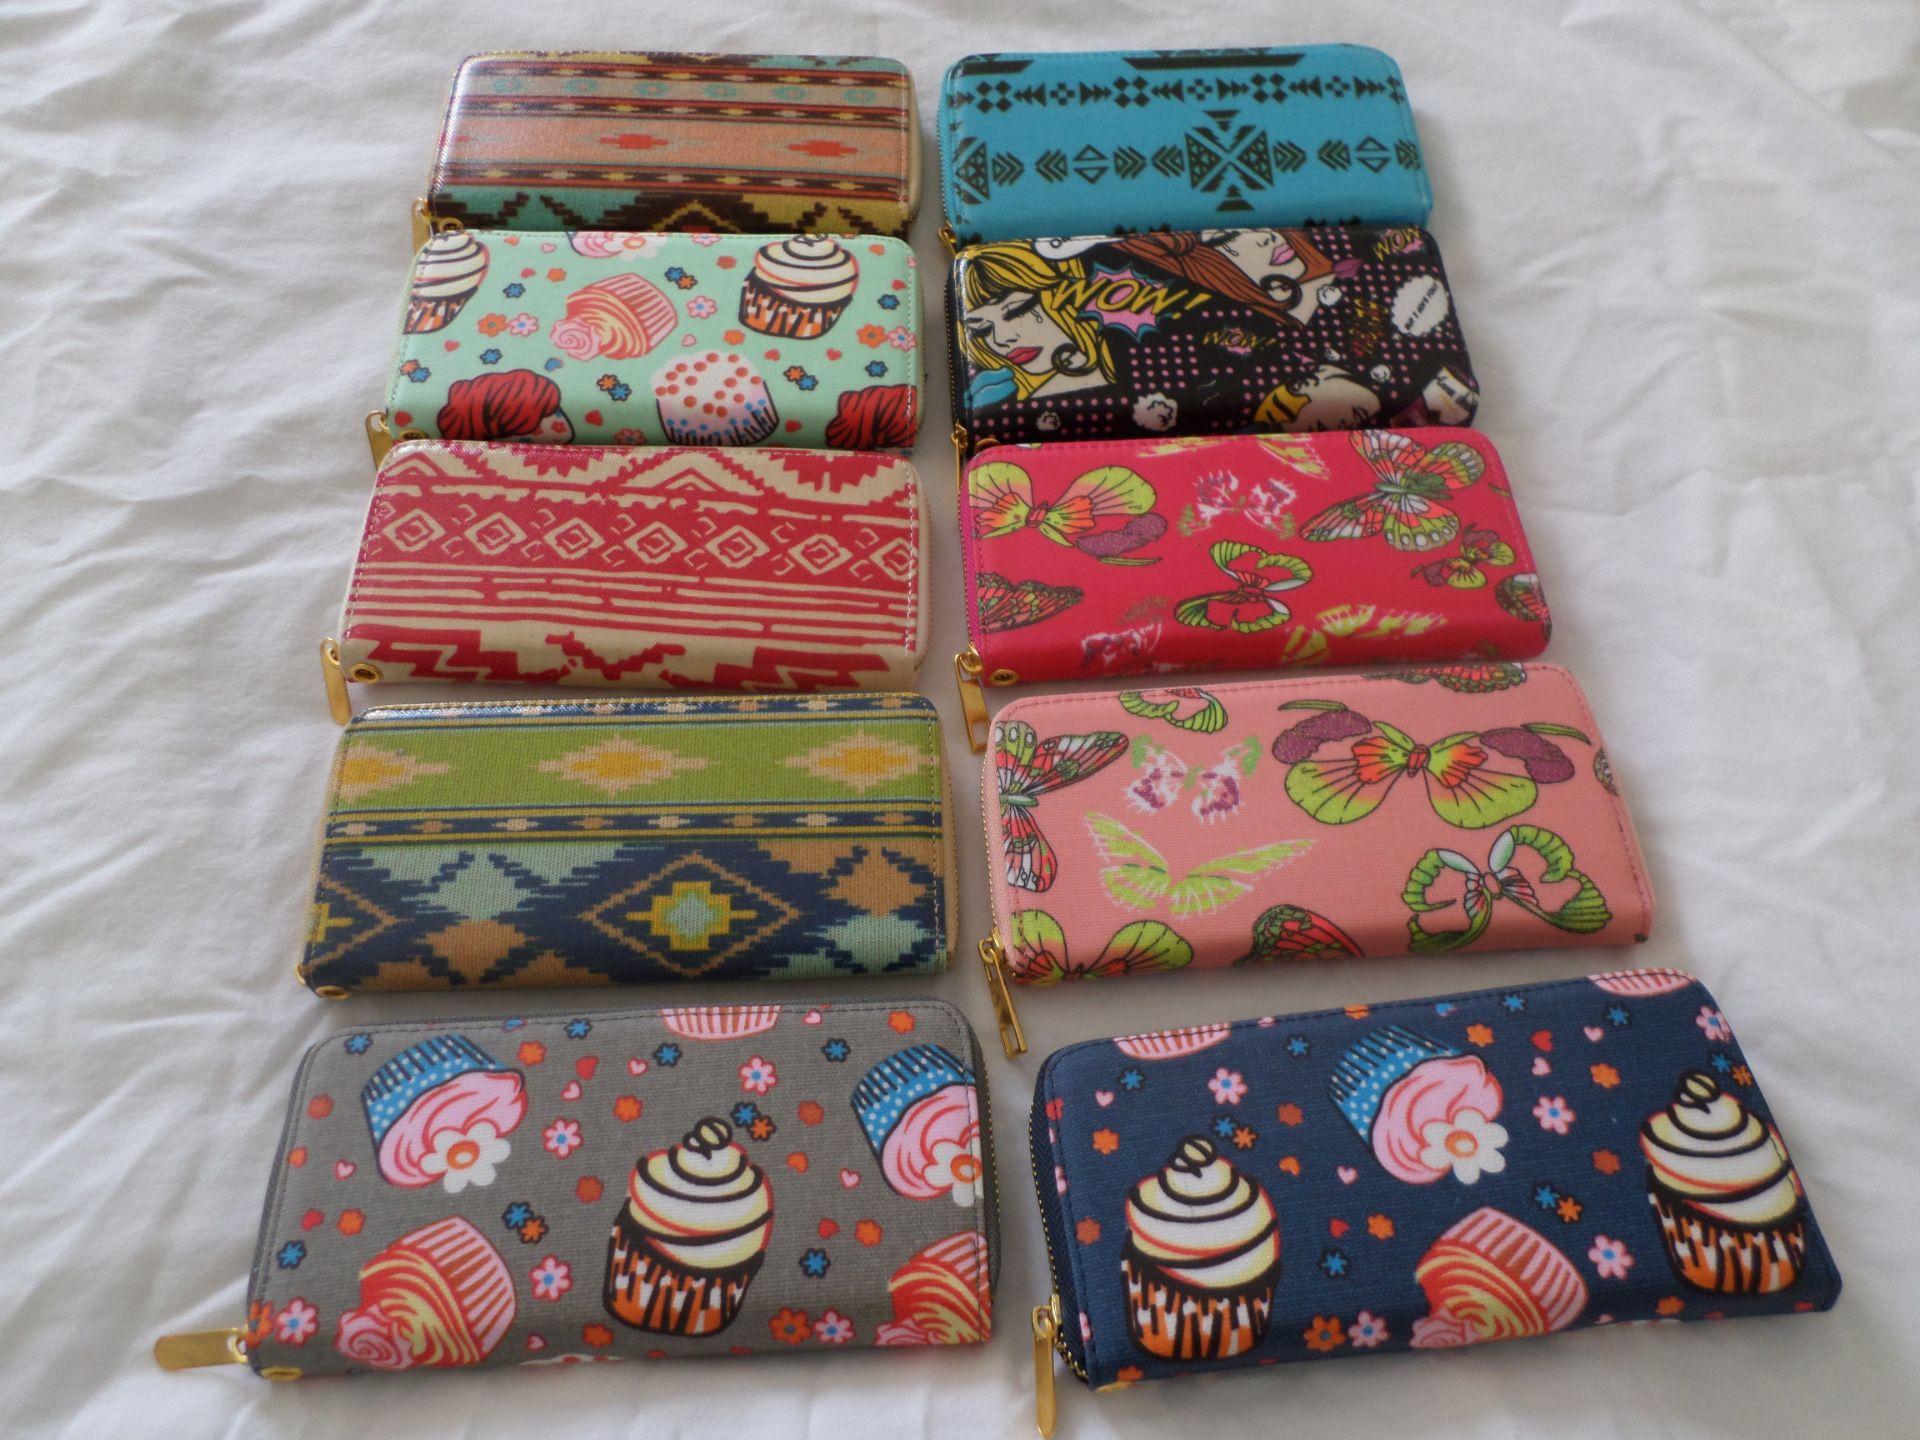 50 x Ladies Clutch/Purses RRP £14 Each. Brand New - Image 2 of 4